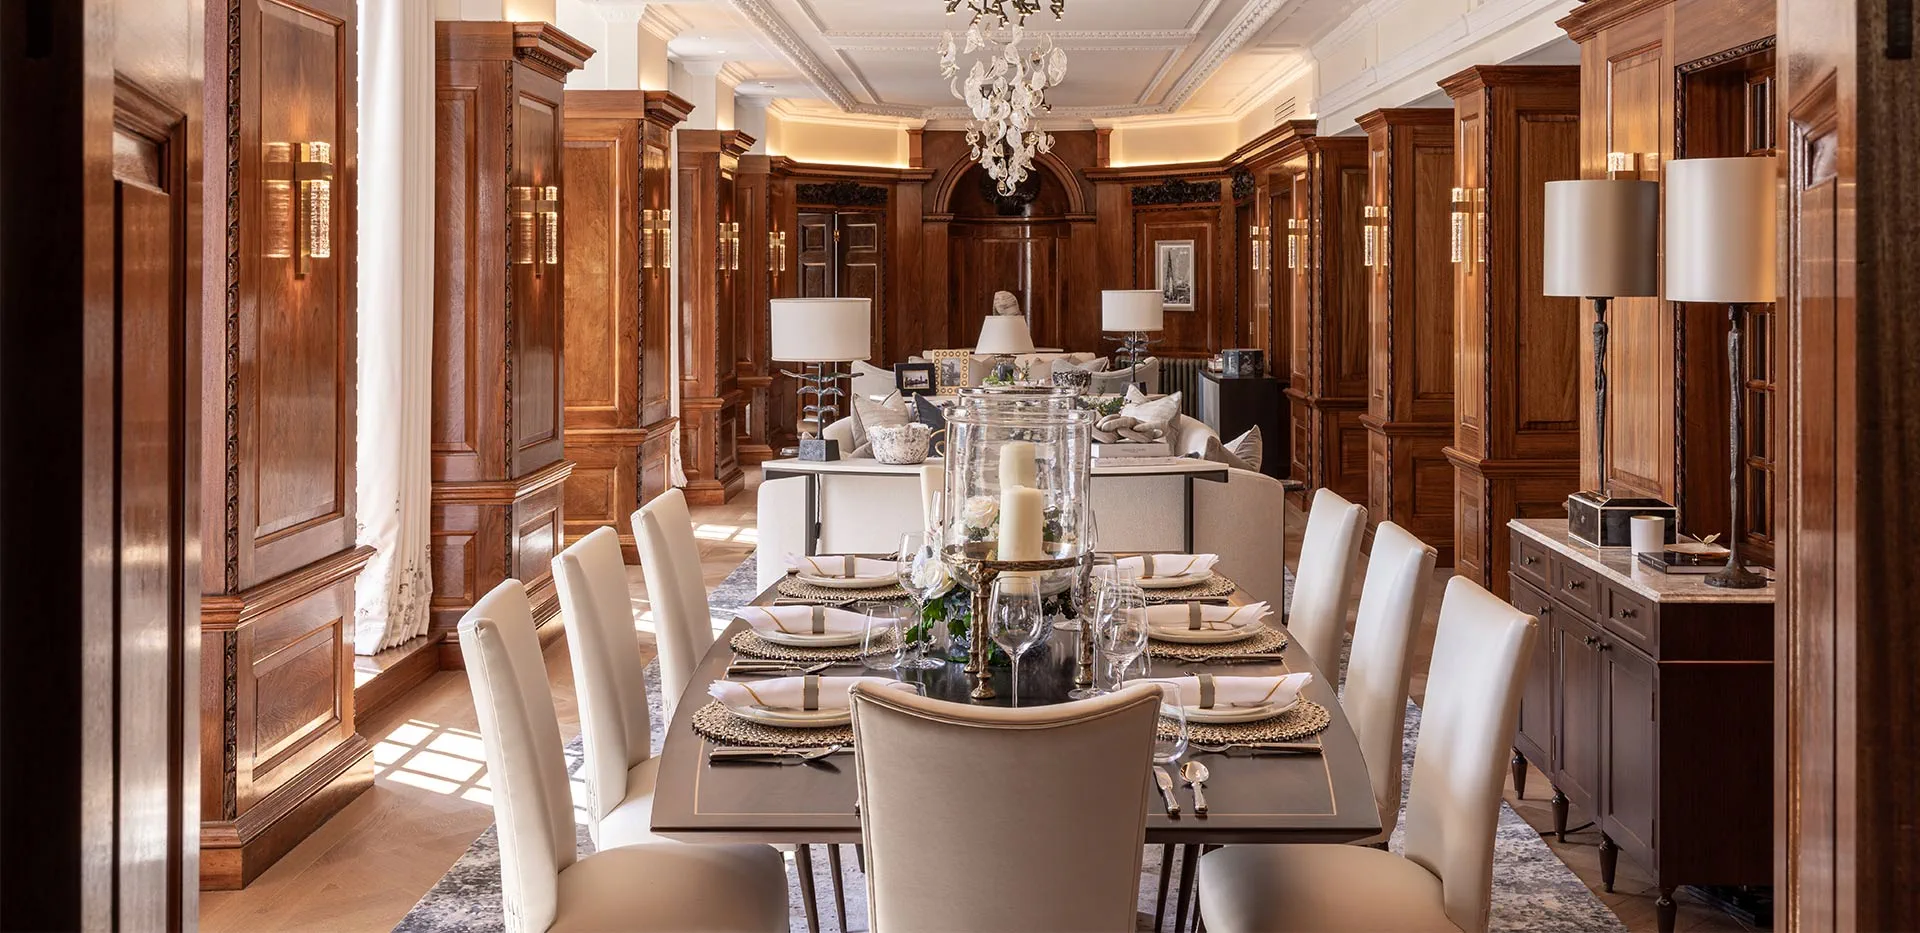 9-millbank_the-gainsborough_dining-living-1